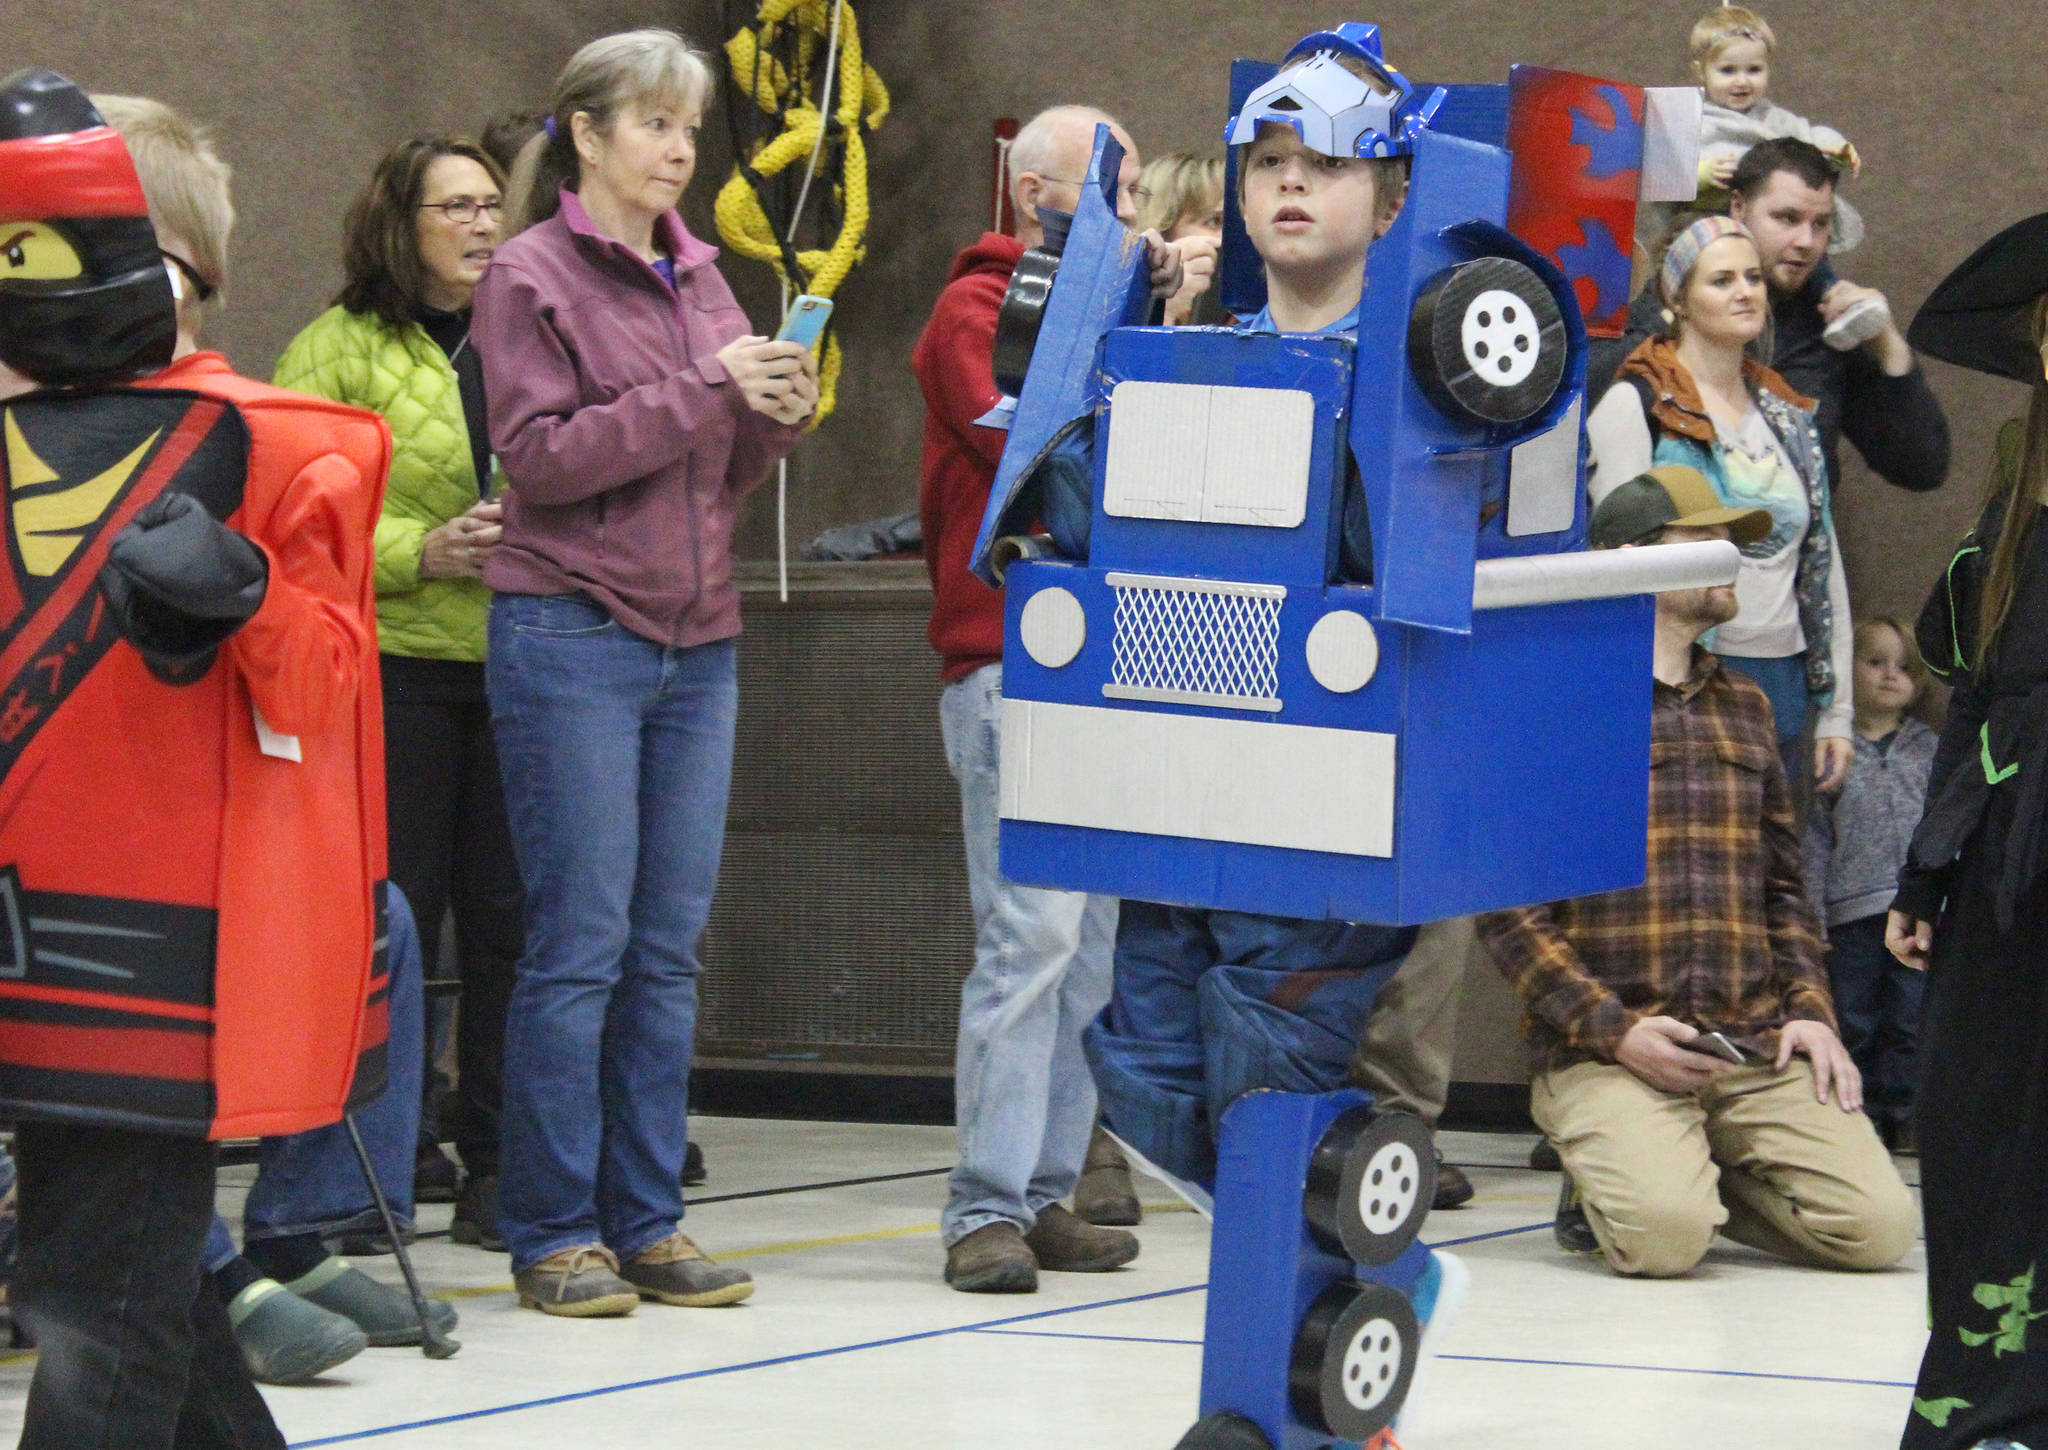 Fletcher Darr, an elementary student, walks in a Halloween costume parade as a transformer Tuesday, Oct. 31, 2017 at Paul Banks Elementary School in Homer, Alaska. (Photo by Megan Pacer/Homer News)